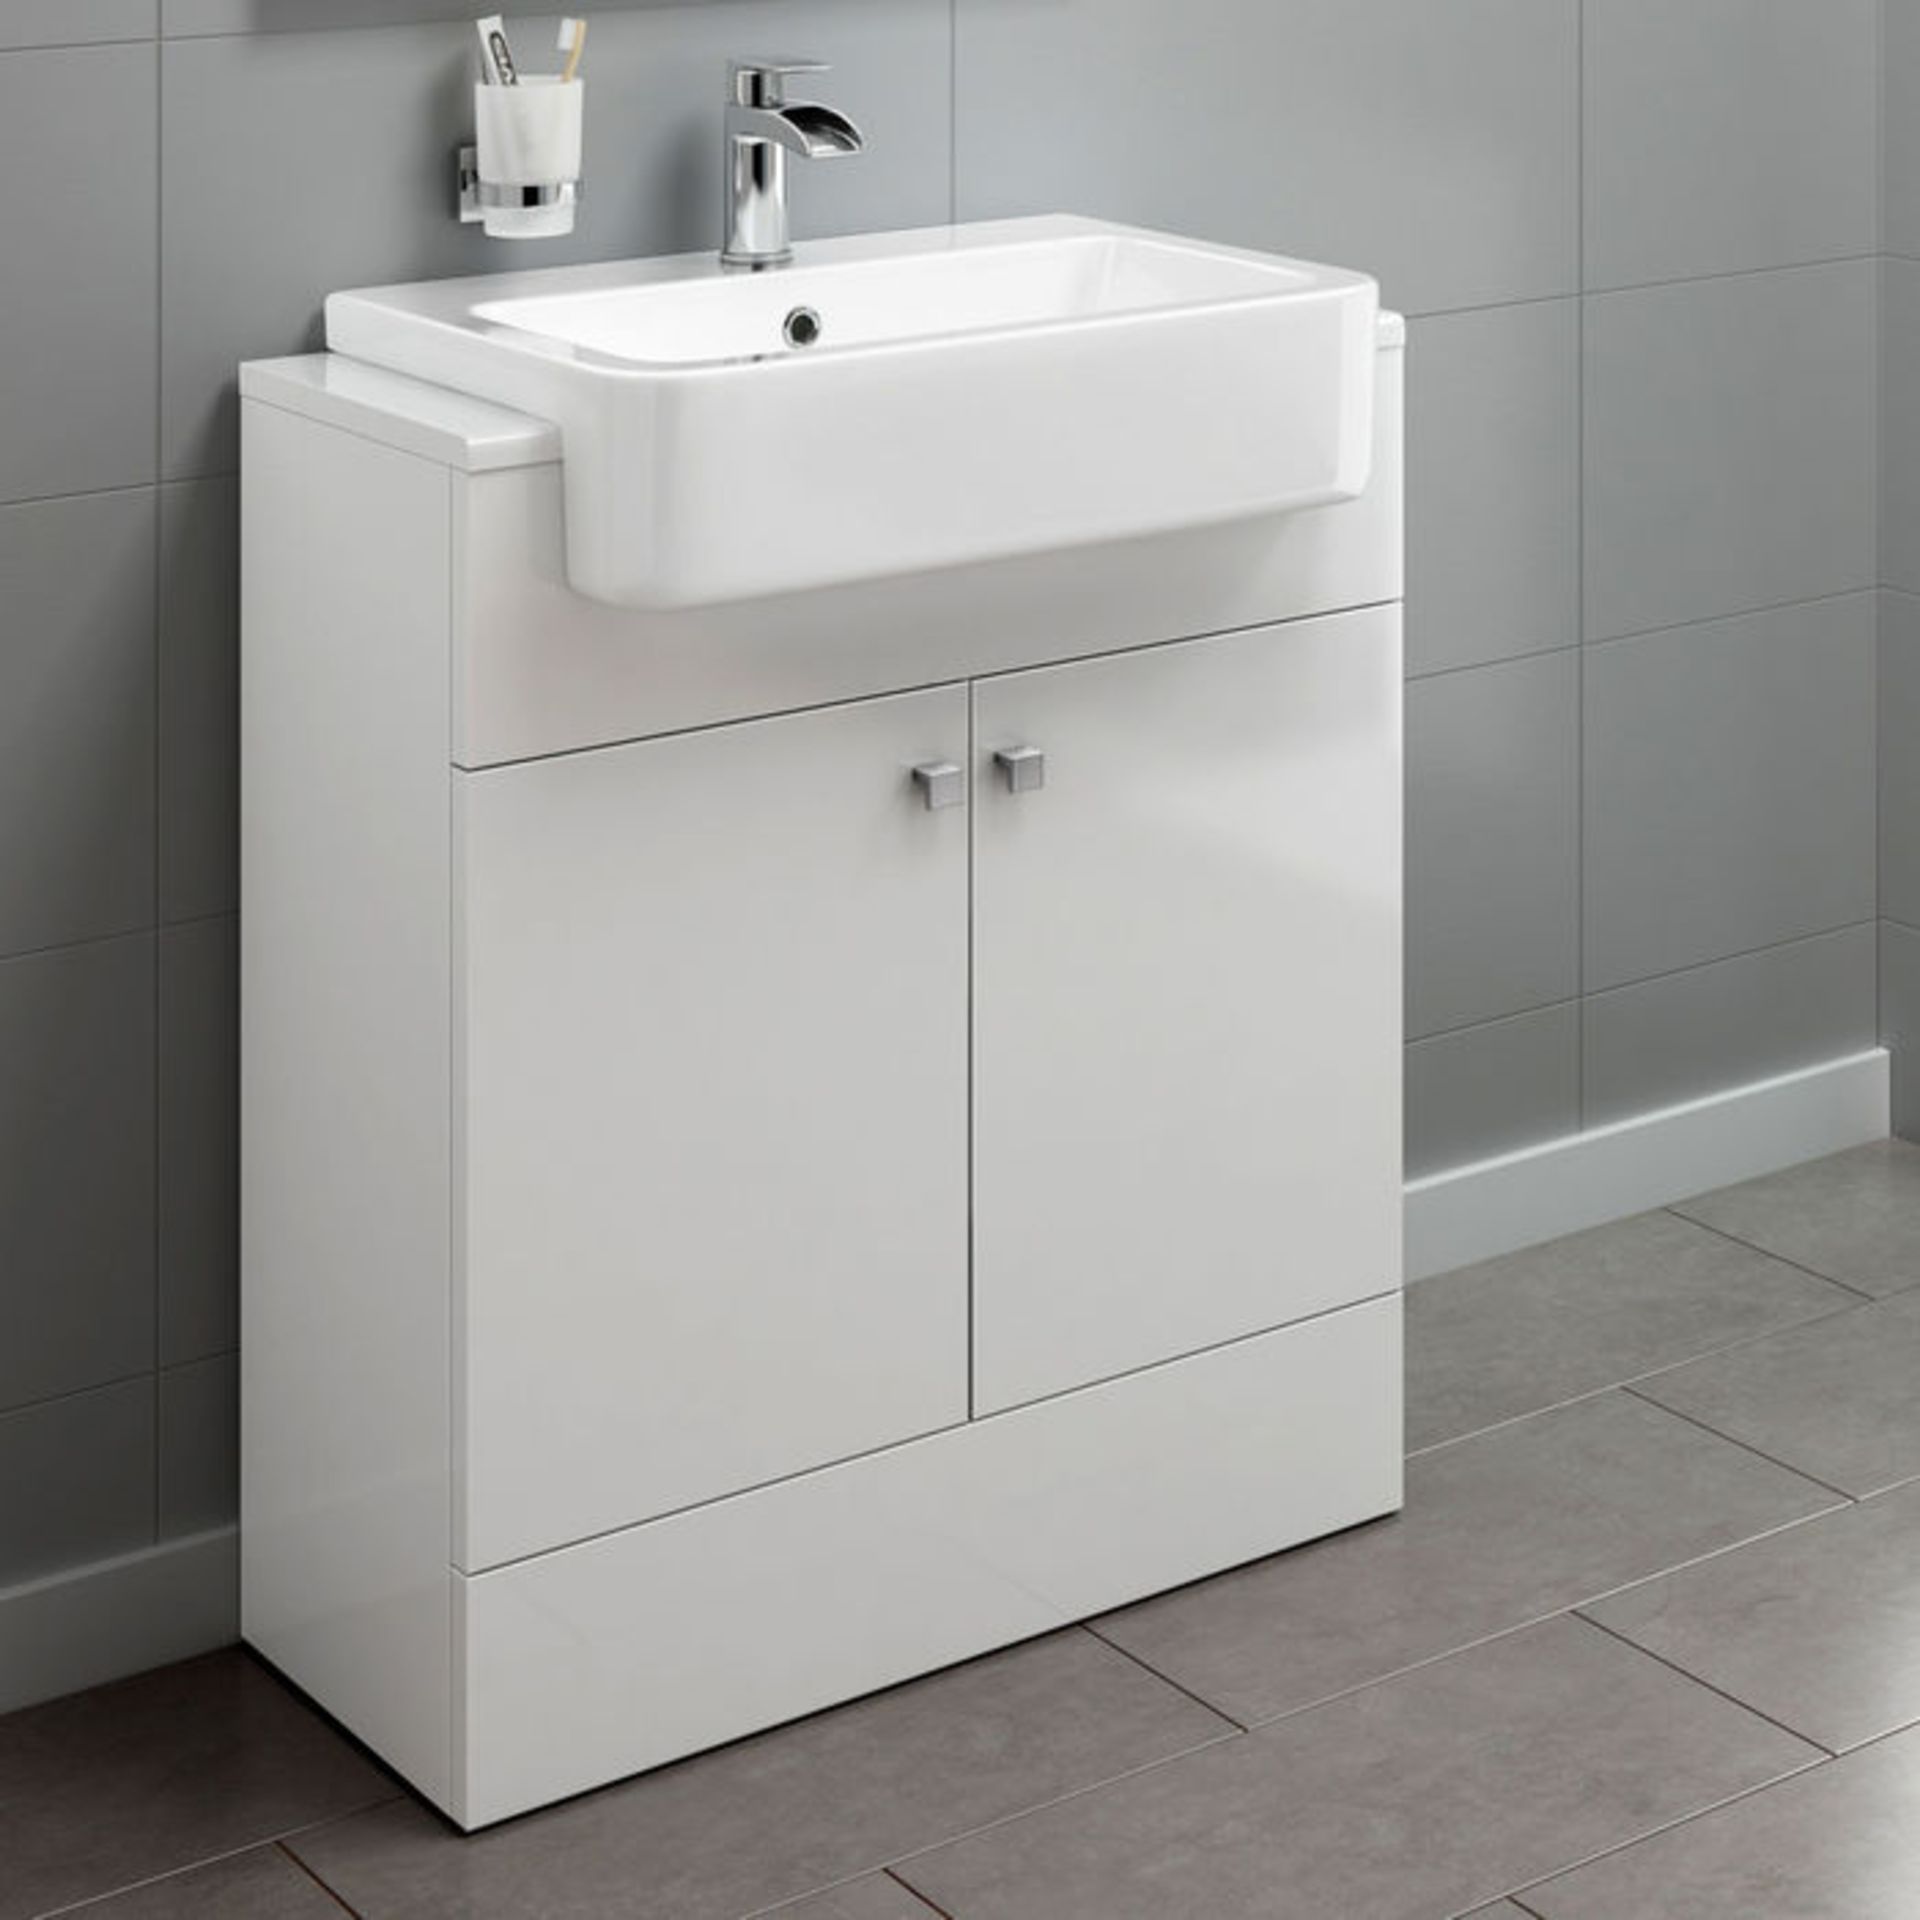 (P272) 660mm Harper Gloss White Basin Vanity Unit - Floor Standing. RRP £499.99. Comes complete with